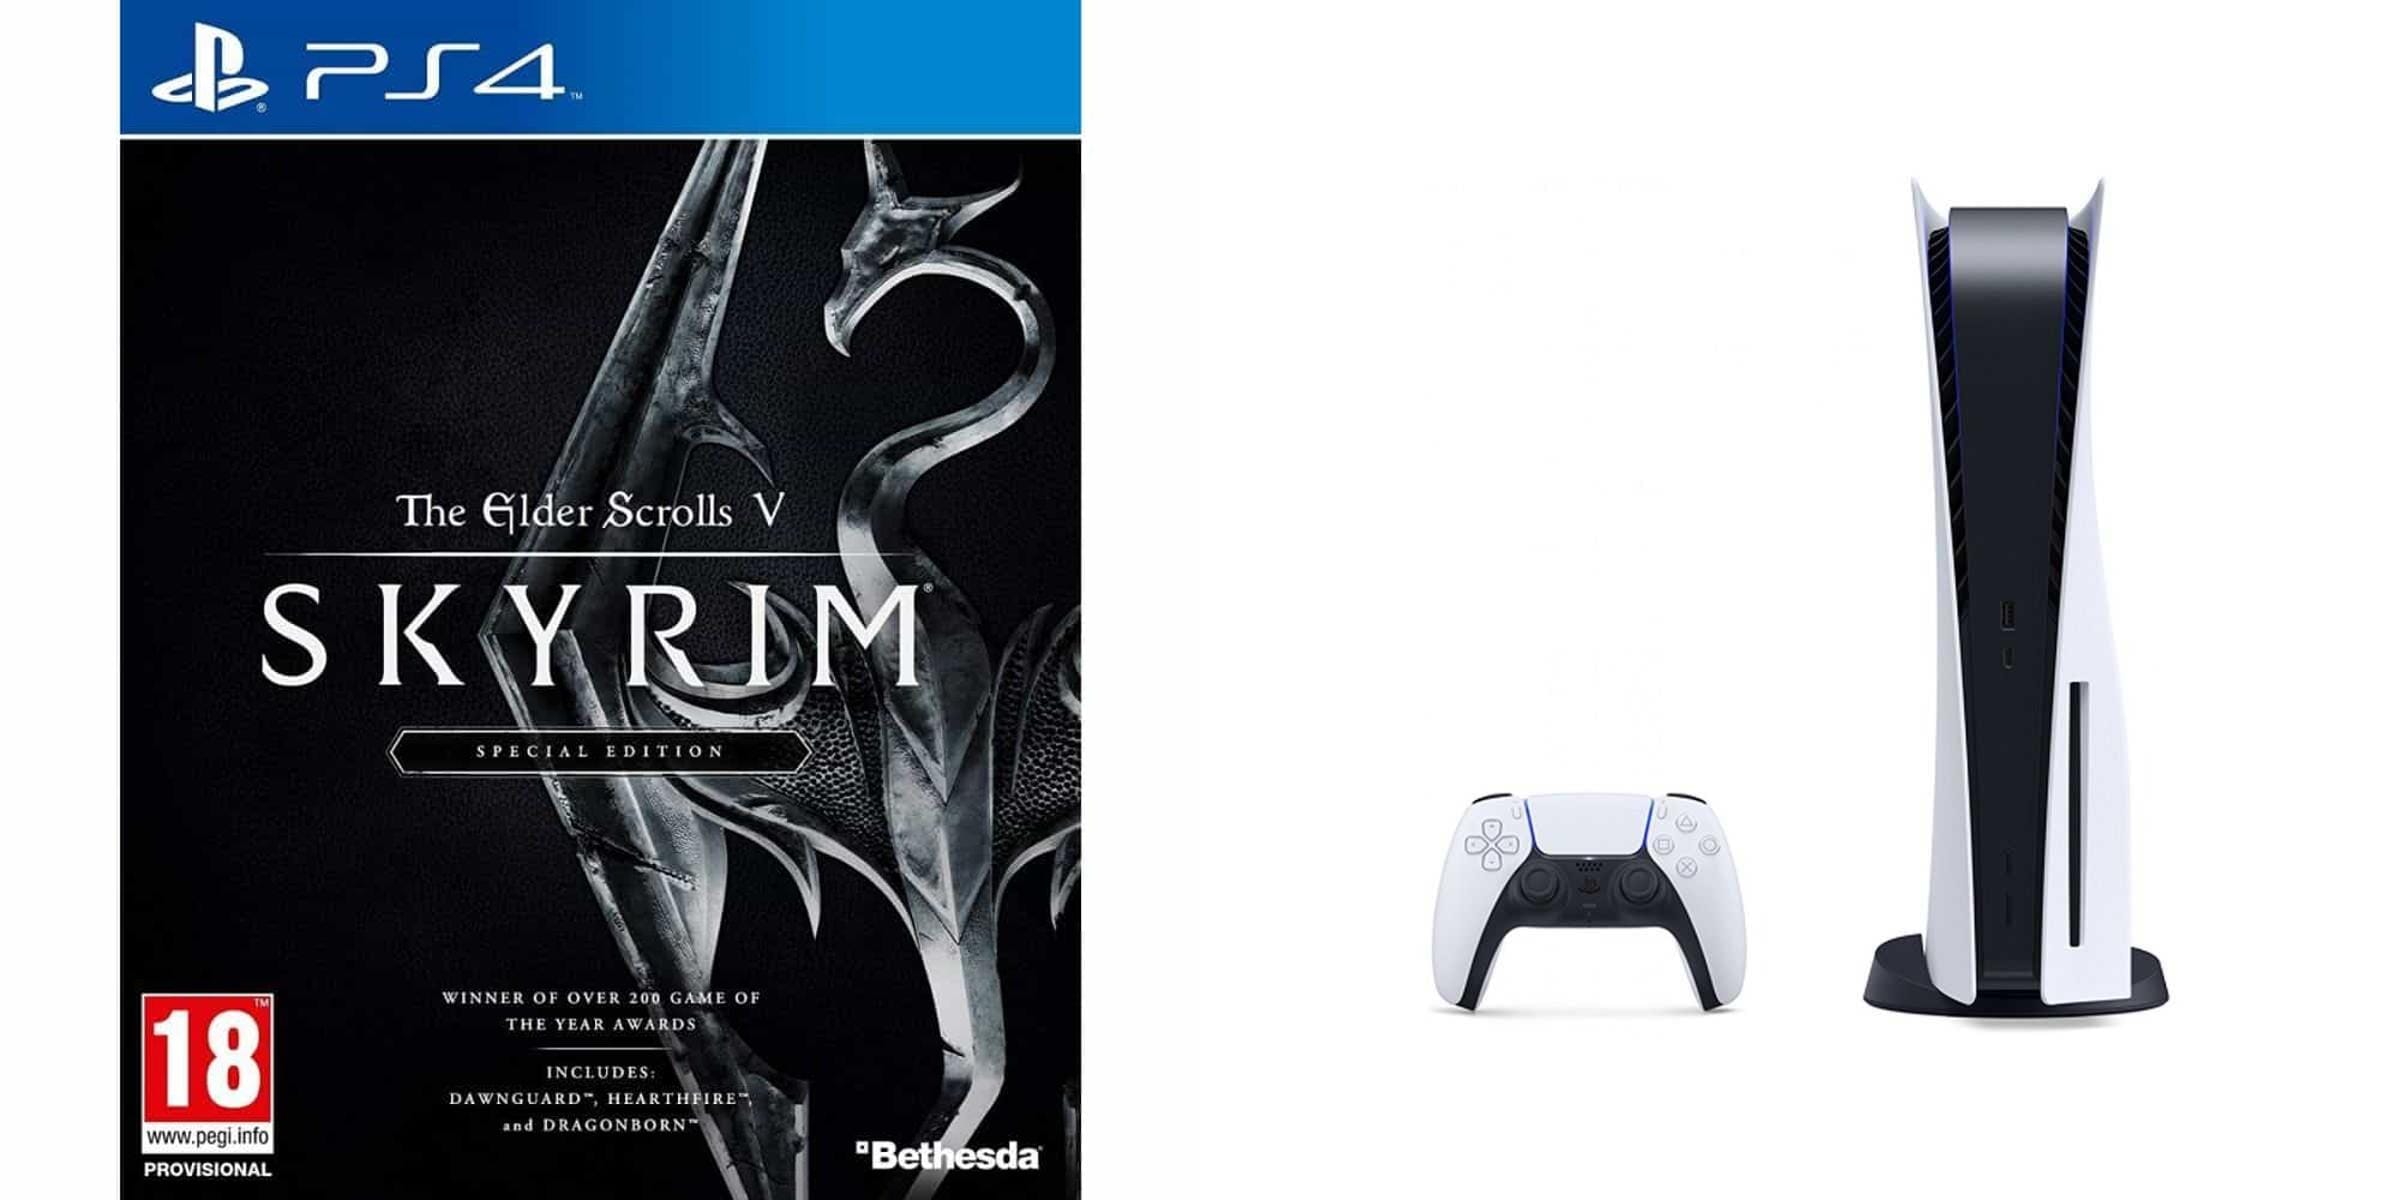 Sony PlayStation 5, 1 Wireless Controller, White - CFI-1016A01 MEE, with Elder Scrolls V Skyrim Special Edition for PlayStation 4